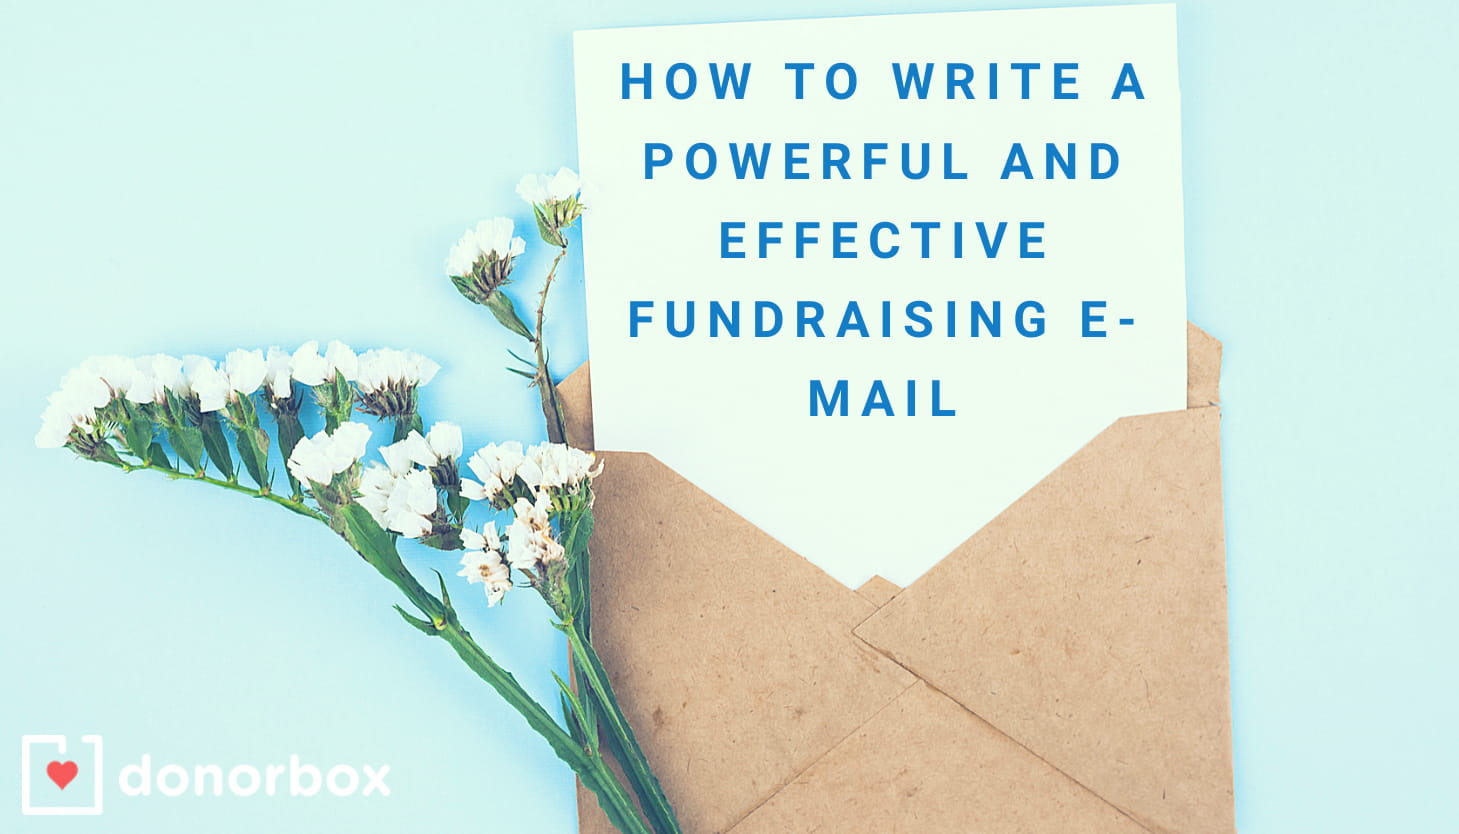 How To Write a Powerful and Effective Fundraising E-mail